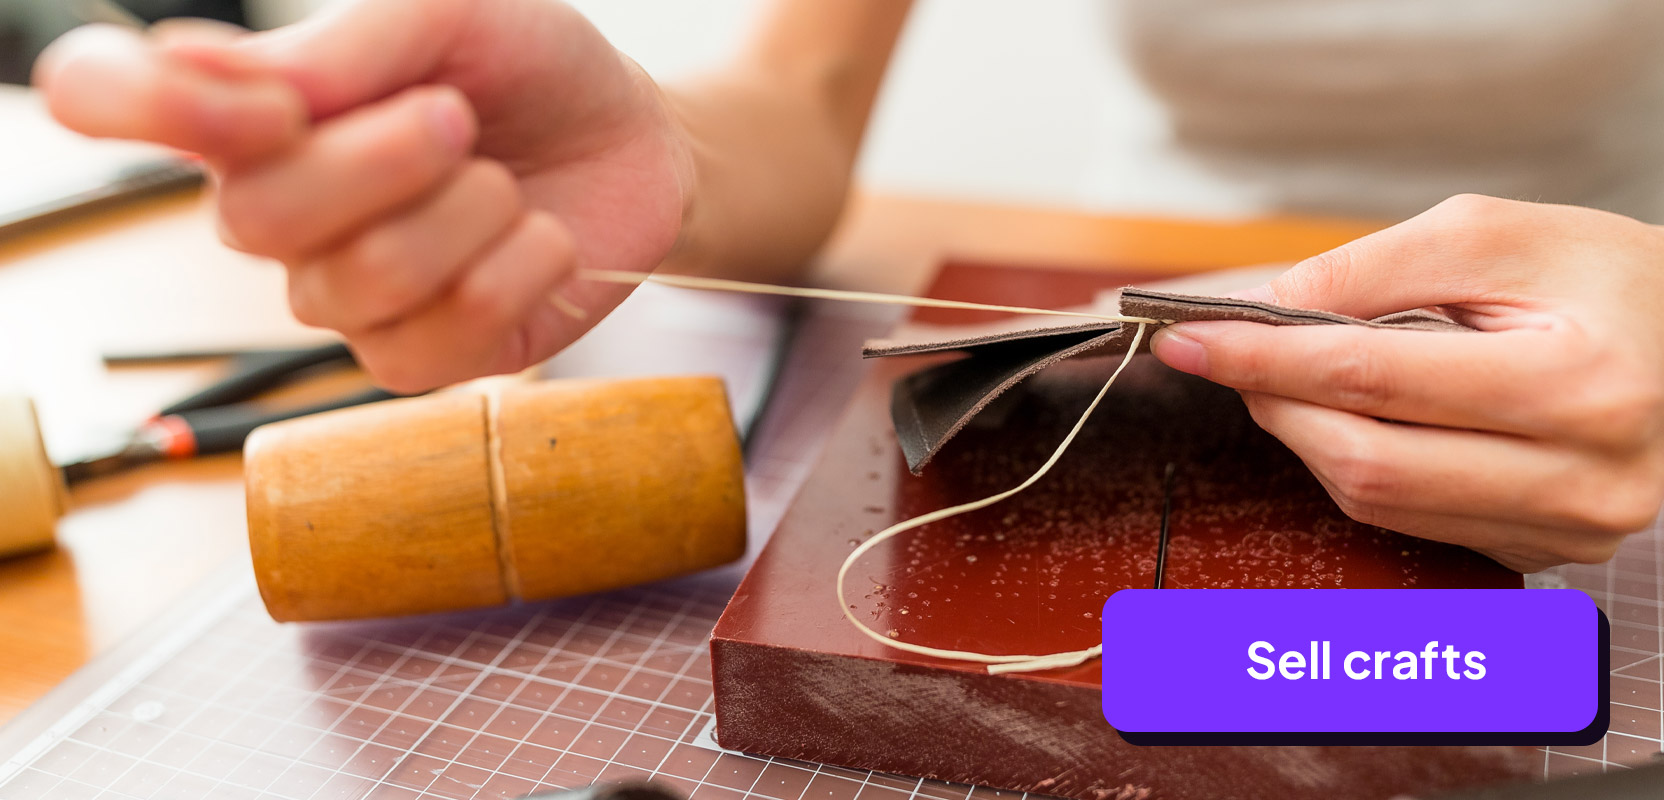 Teen crafting a leather item to sell online for money